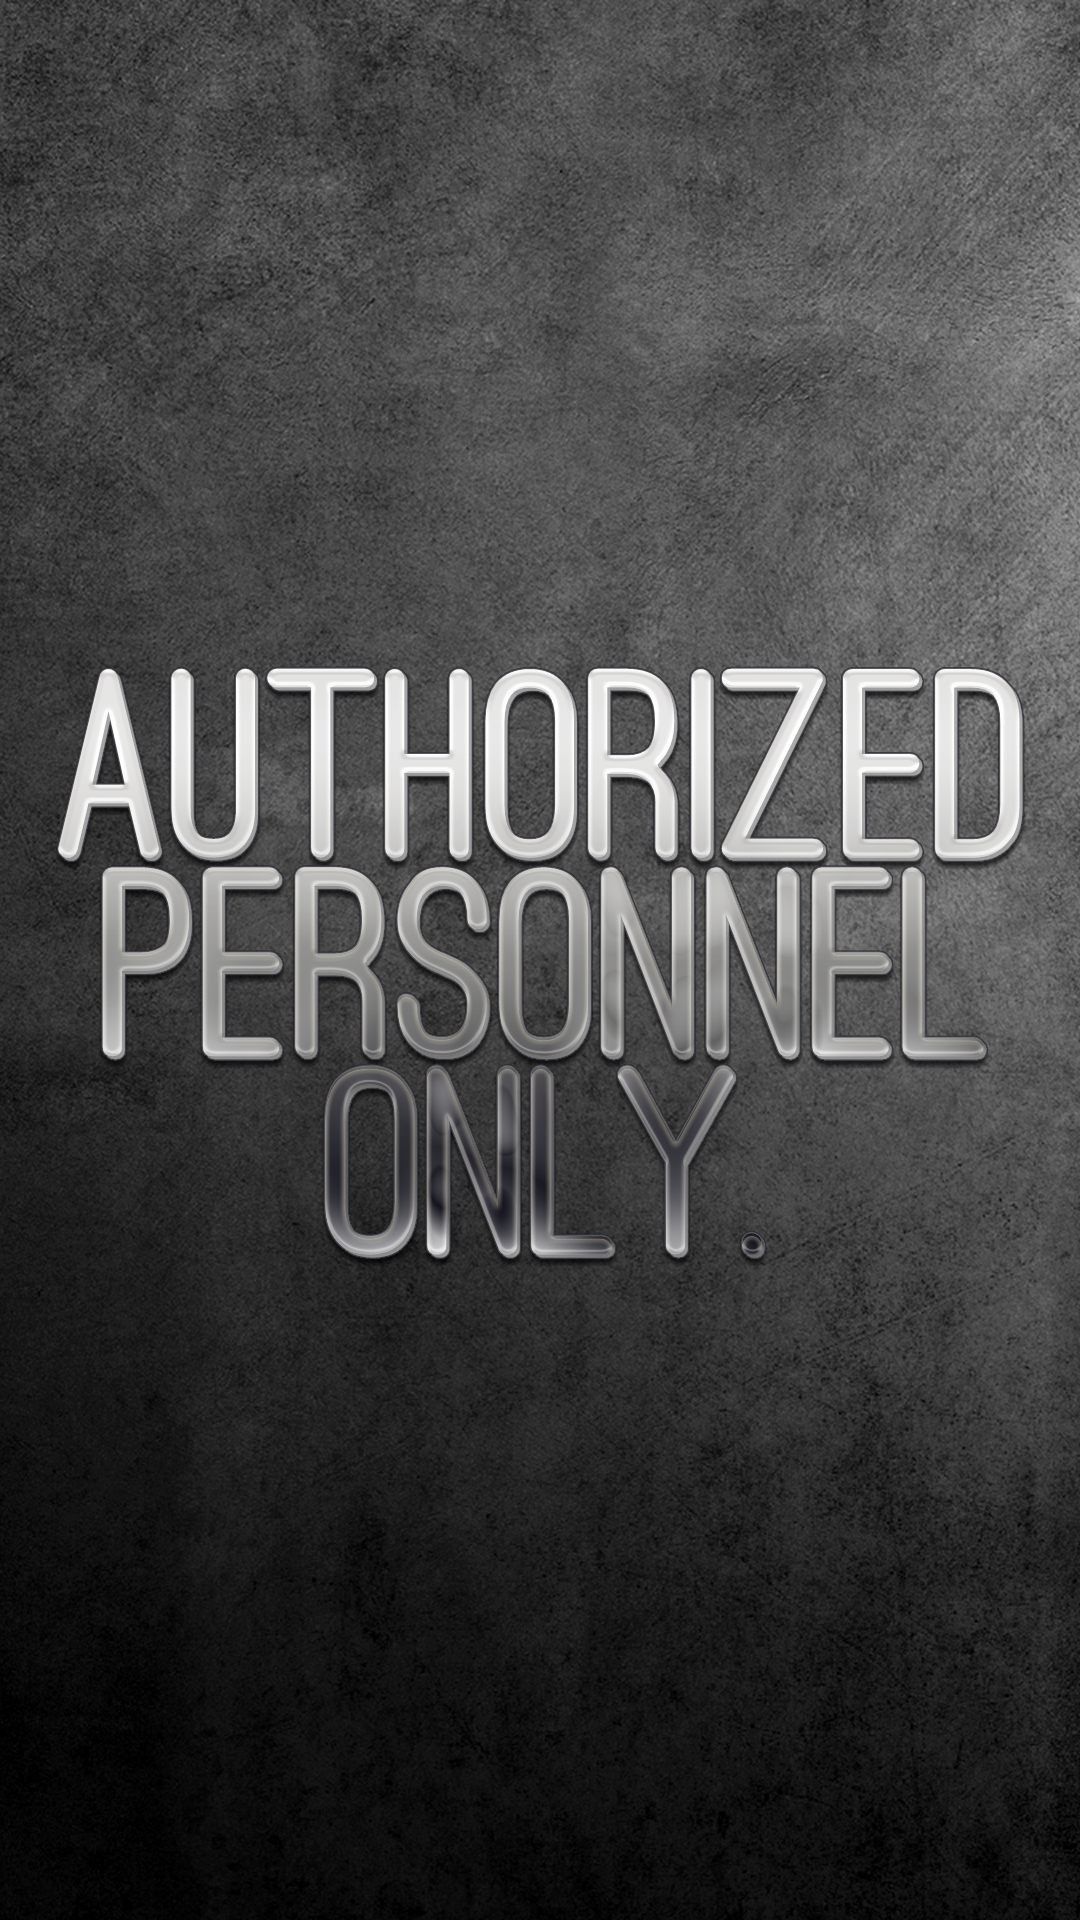 The cover of a book with an authorized personal only sign - Christian iPhone